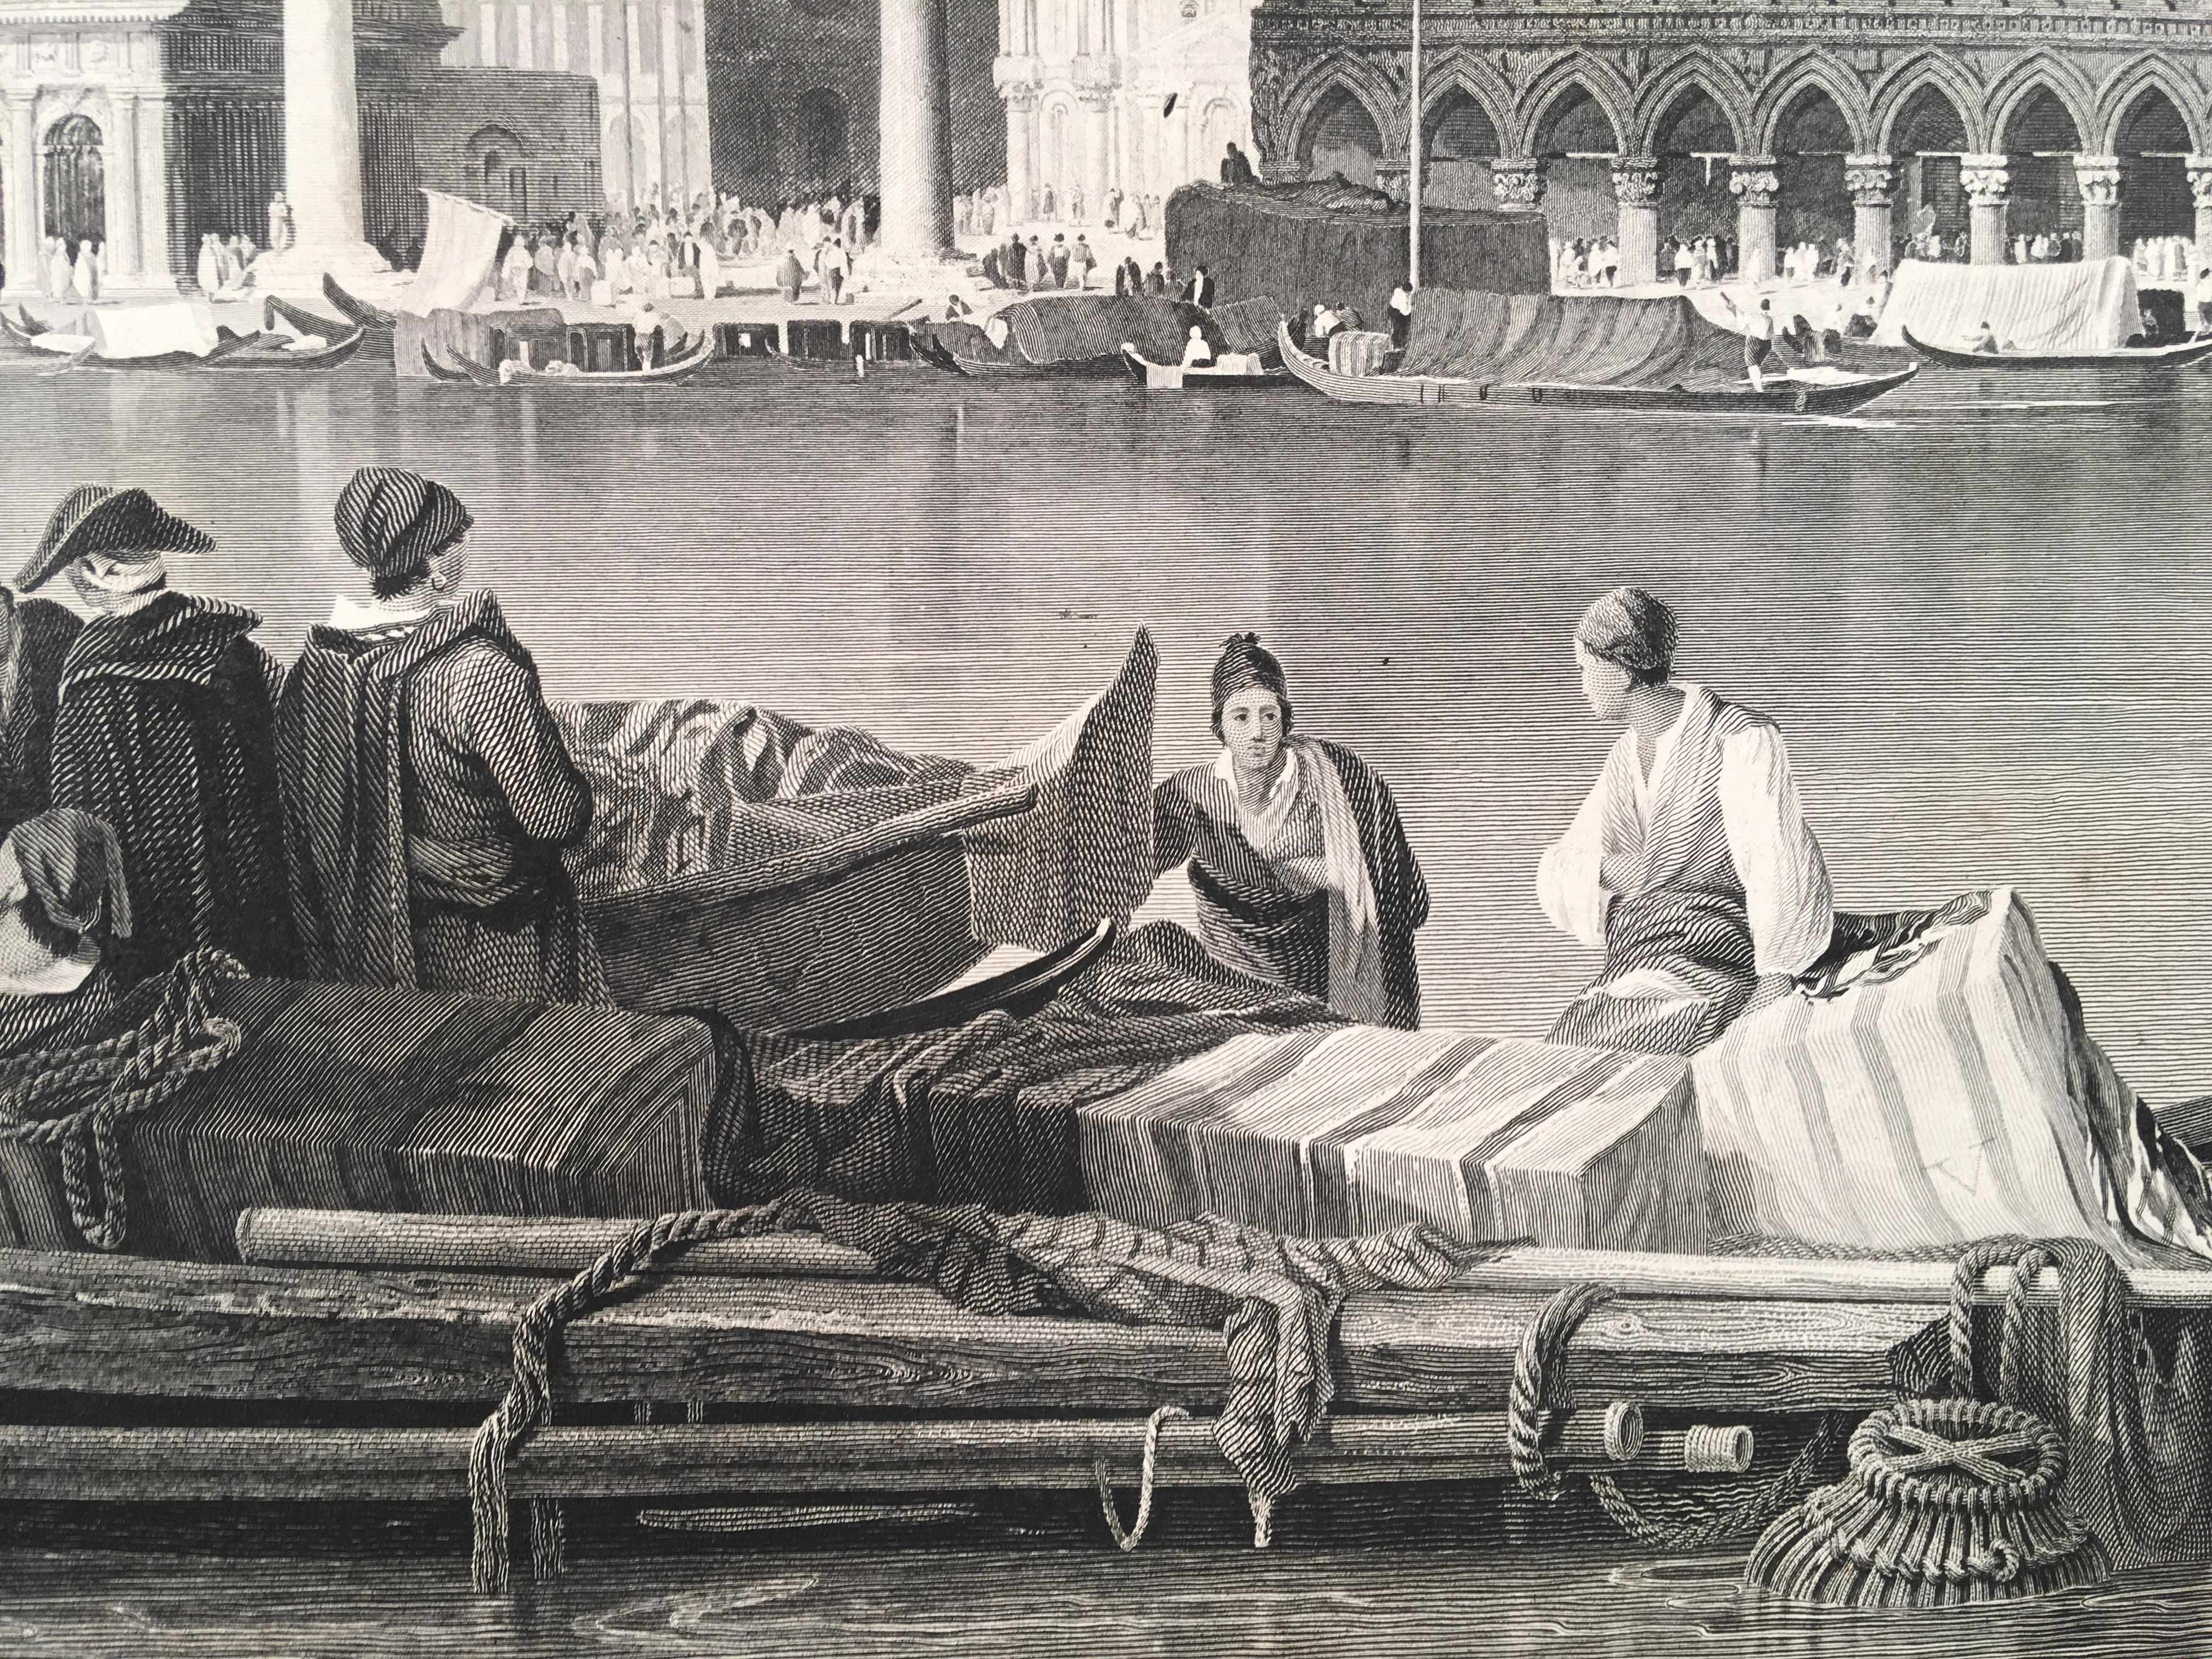 Venice - Grand Canale Piazzo San Marco - Print by Unknown